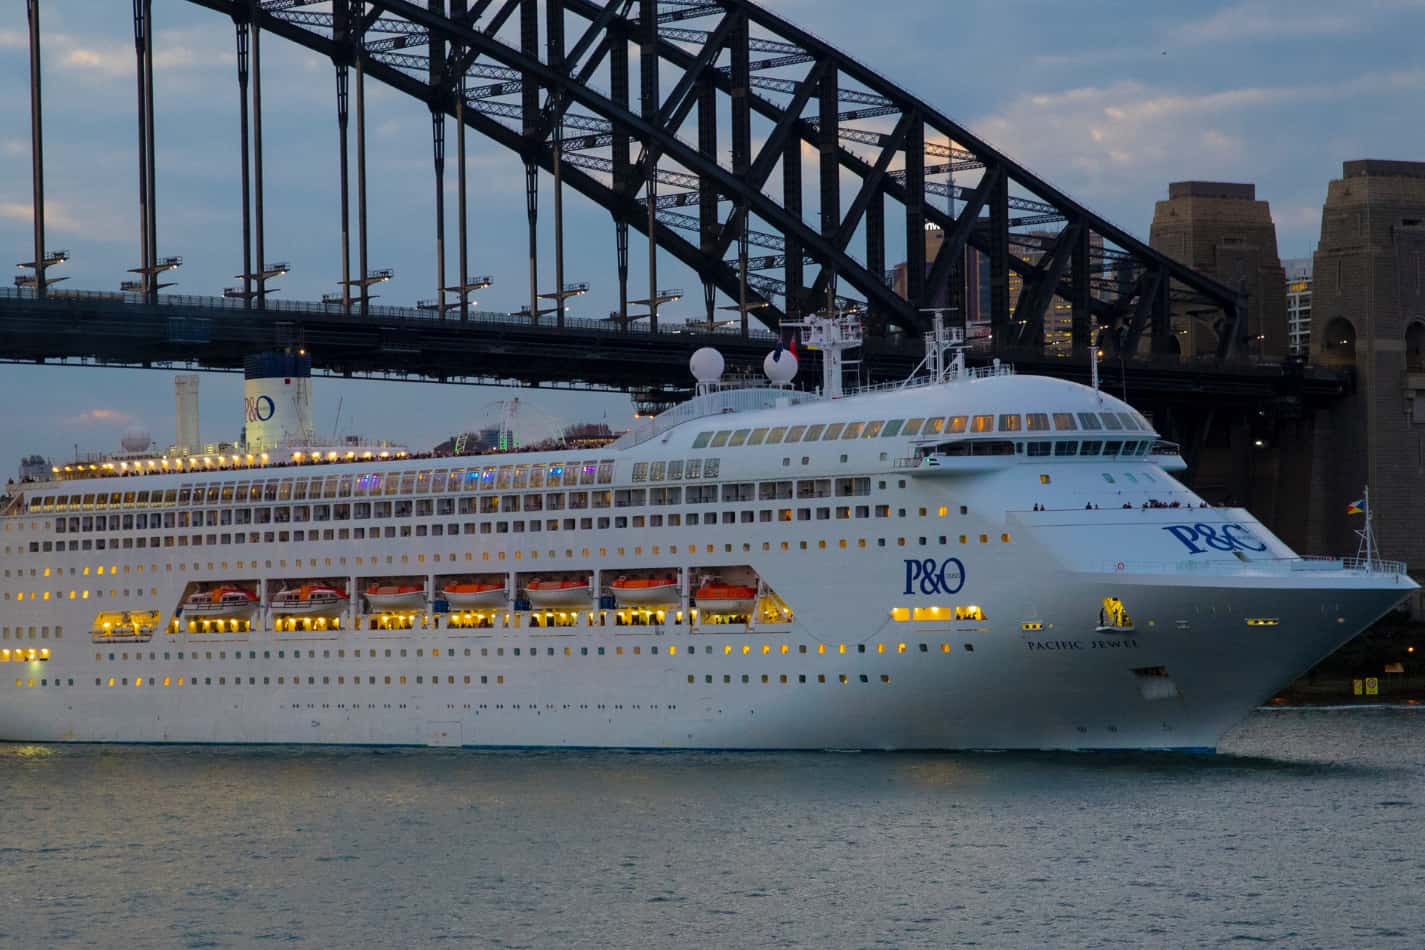 Planning to Cruise Australia? Here Are The Best Months